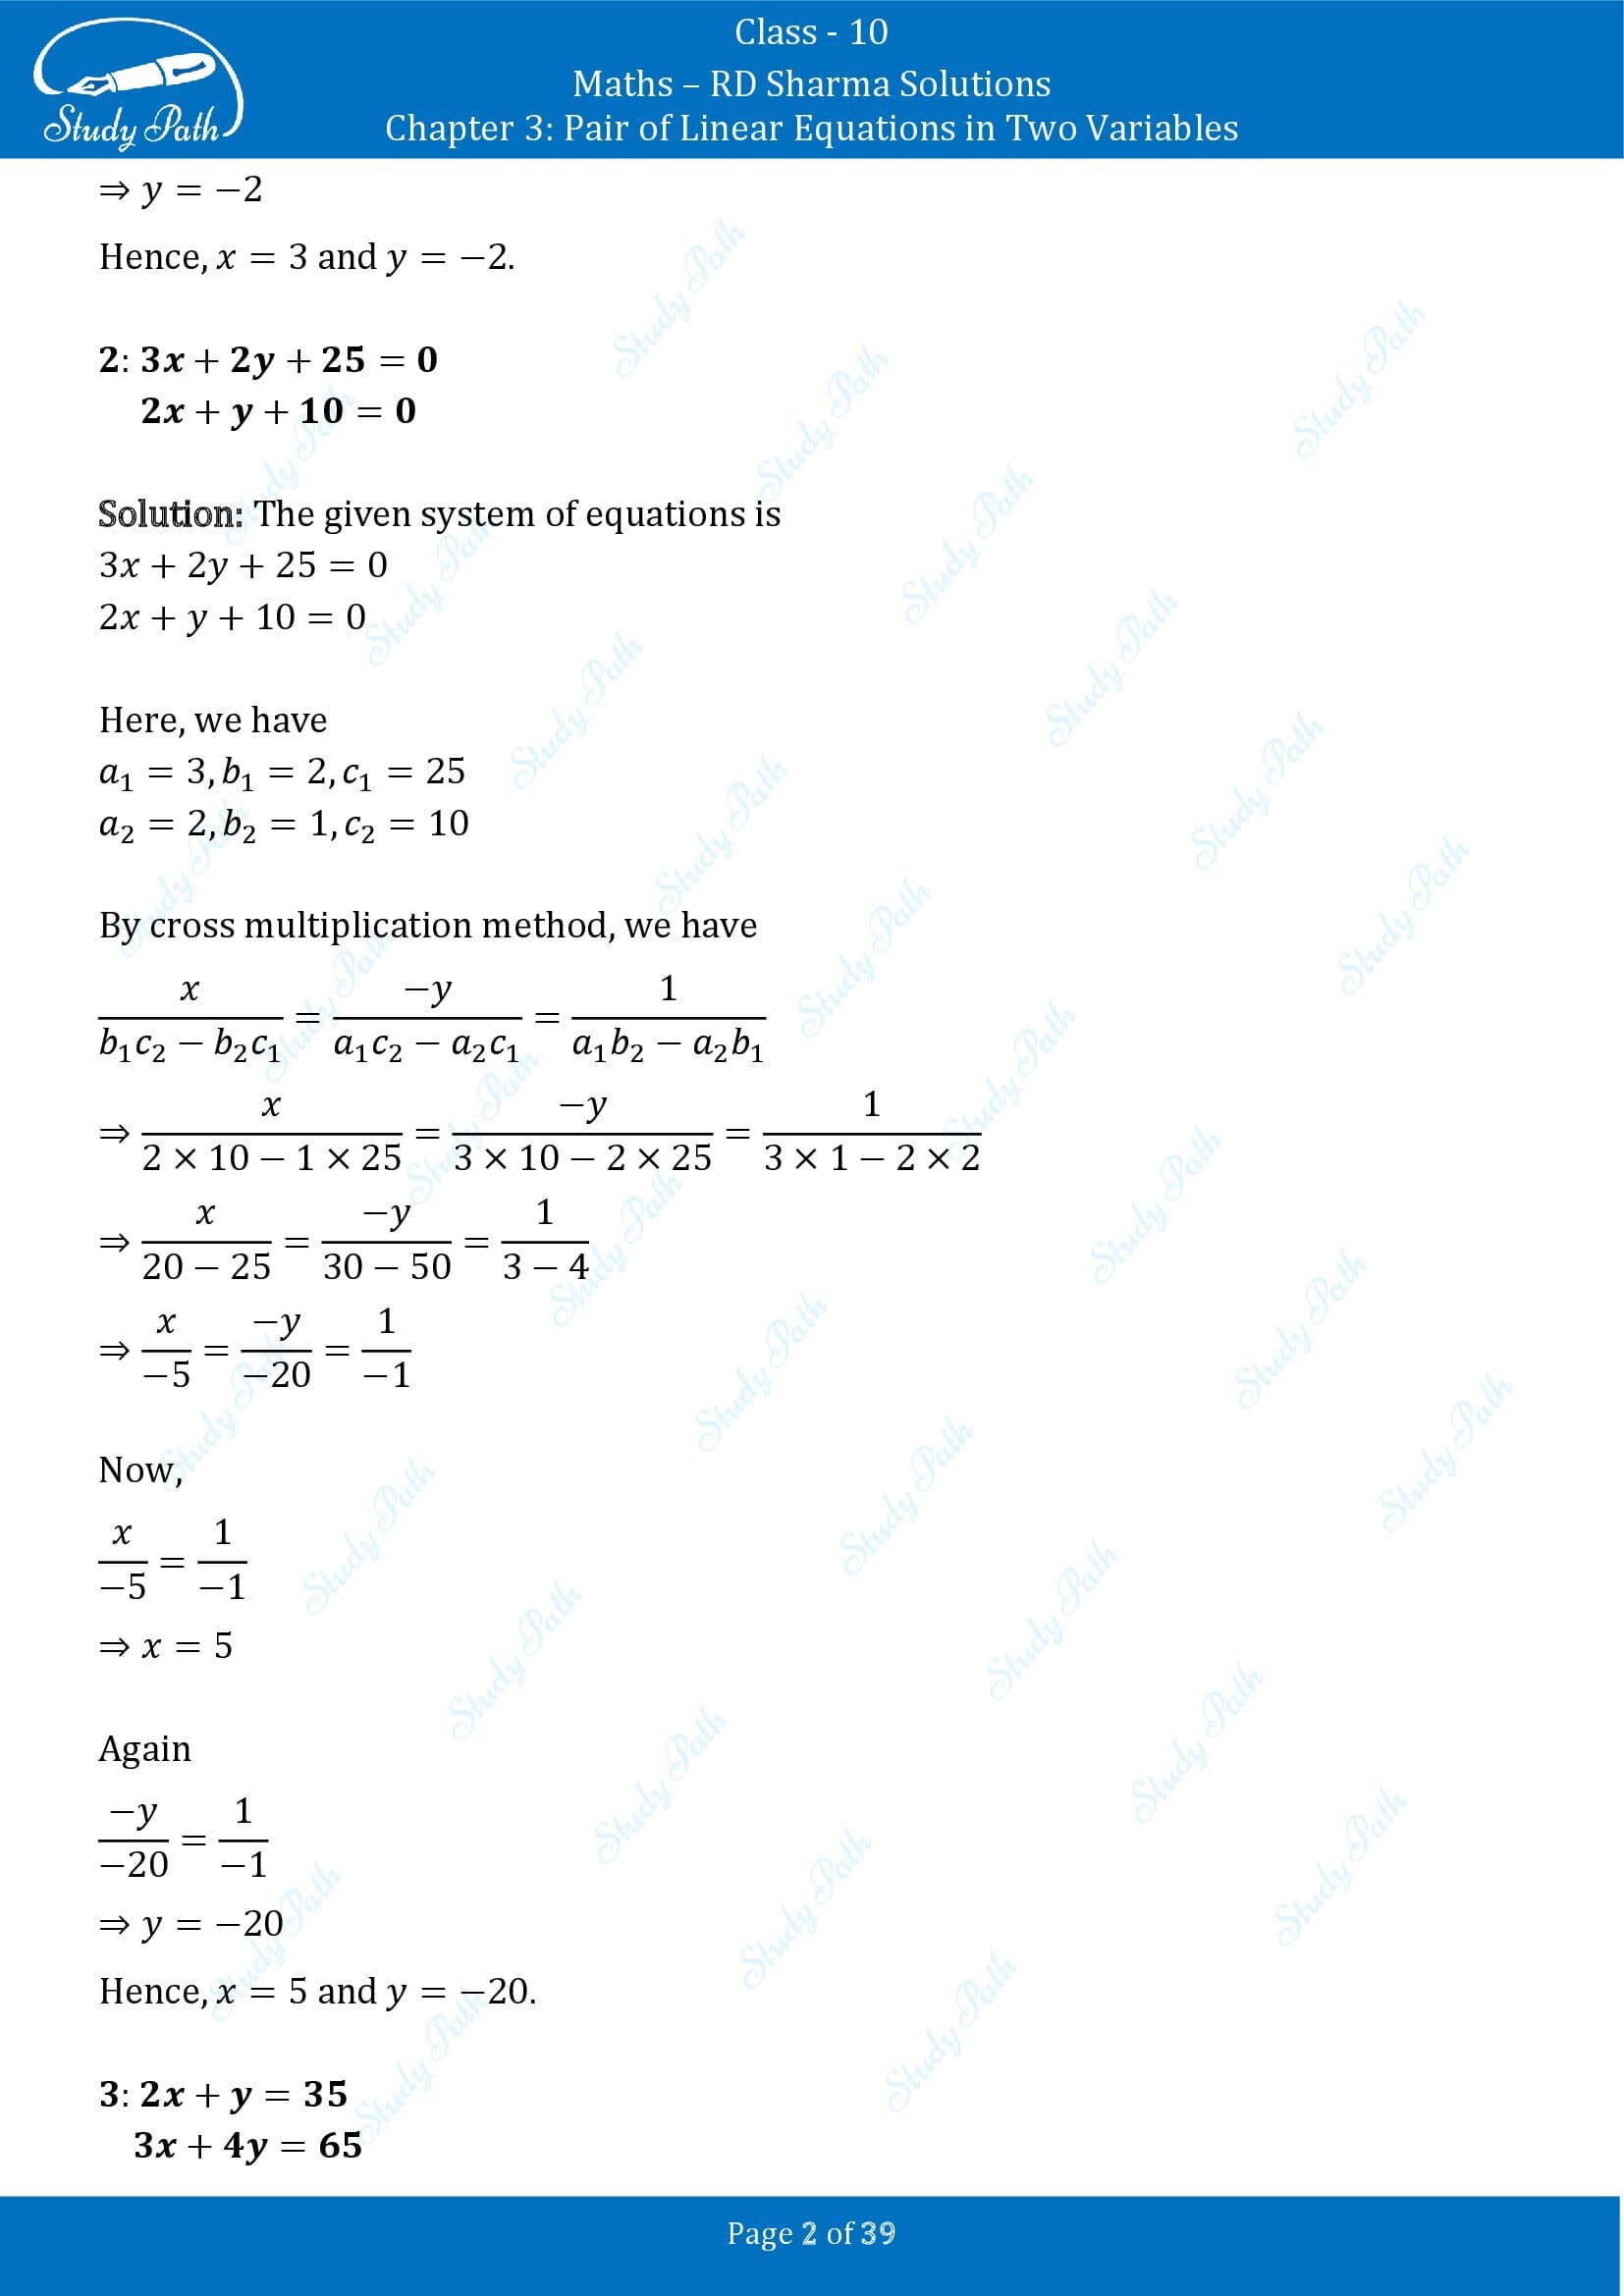 RD Sharma Solutions Class 10 Chapter 3 Pair of Linear Equations in Two Variables Exercise 3.4 00002